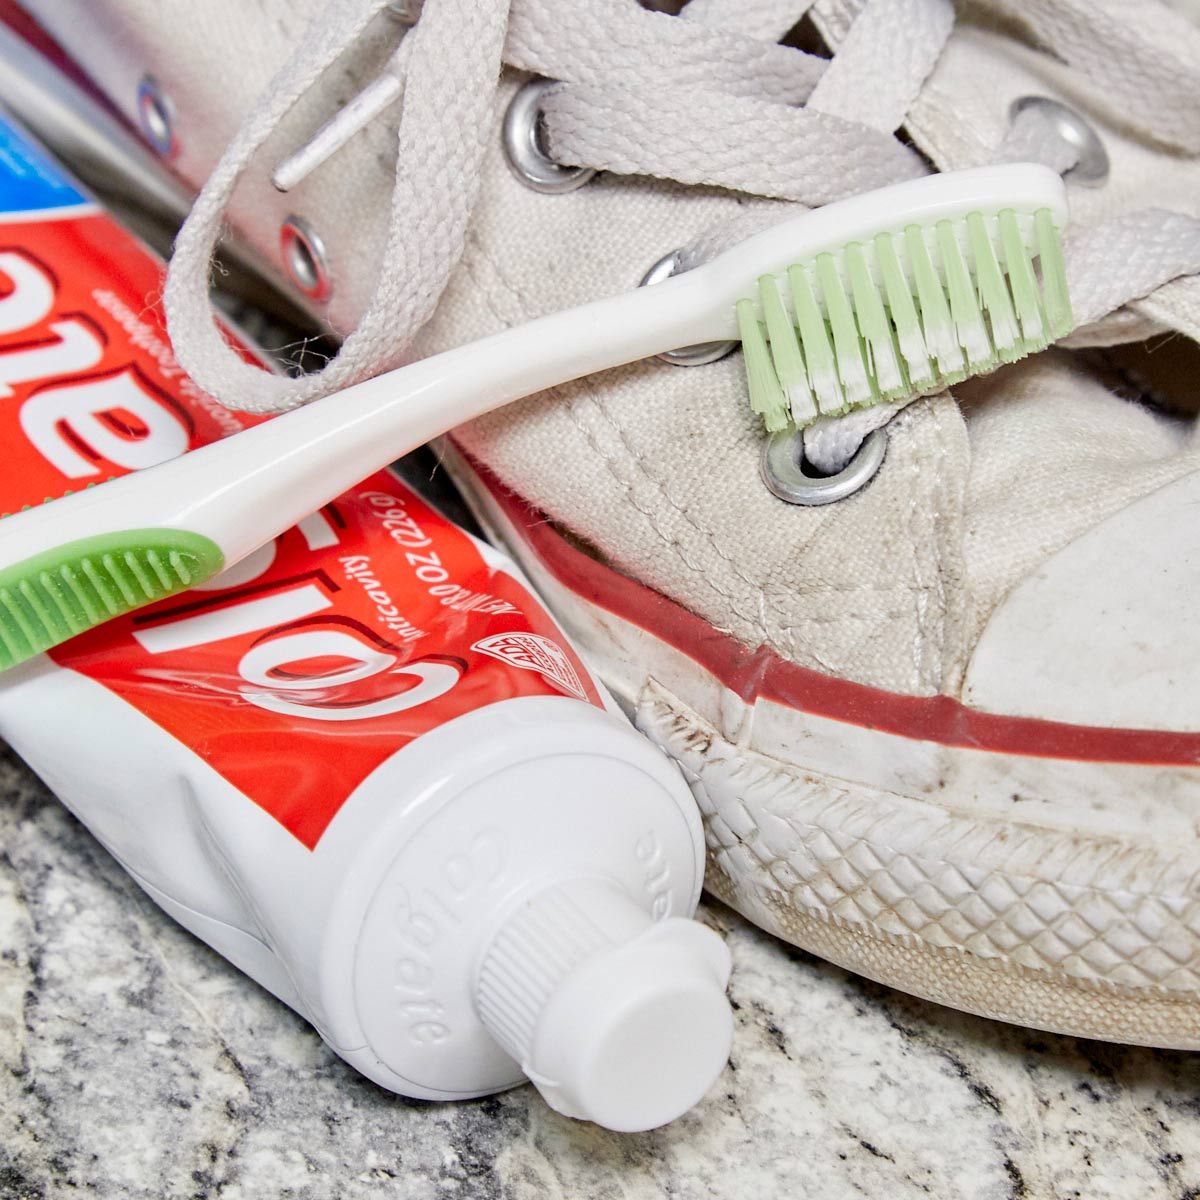 Can Toothpaste Be Used to Clean Shoes?